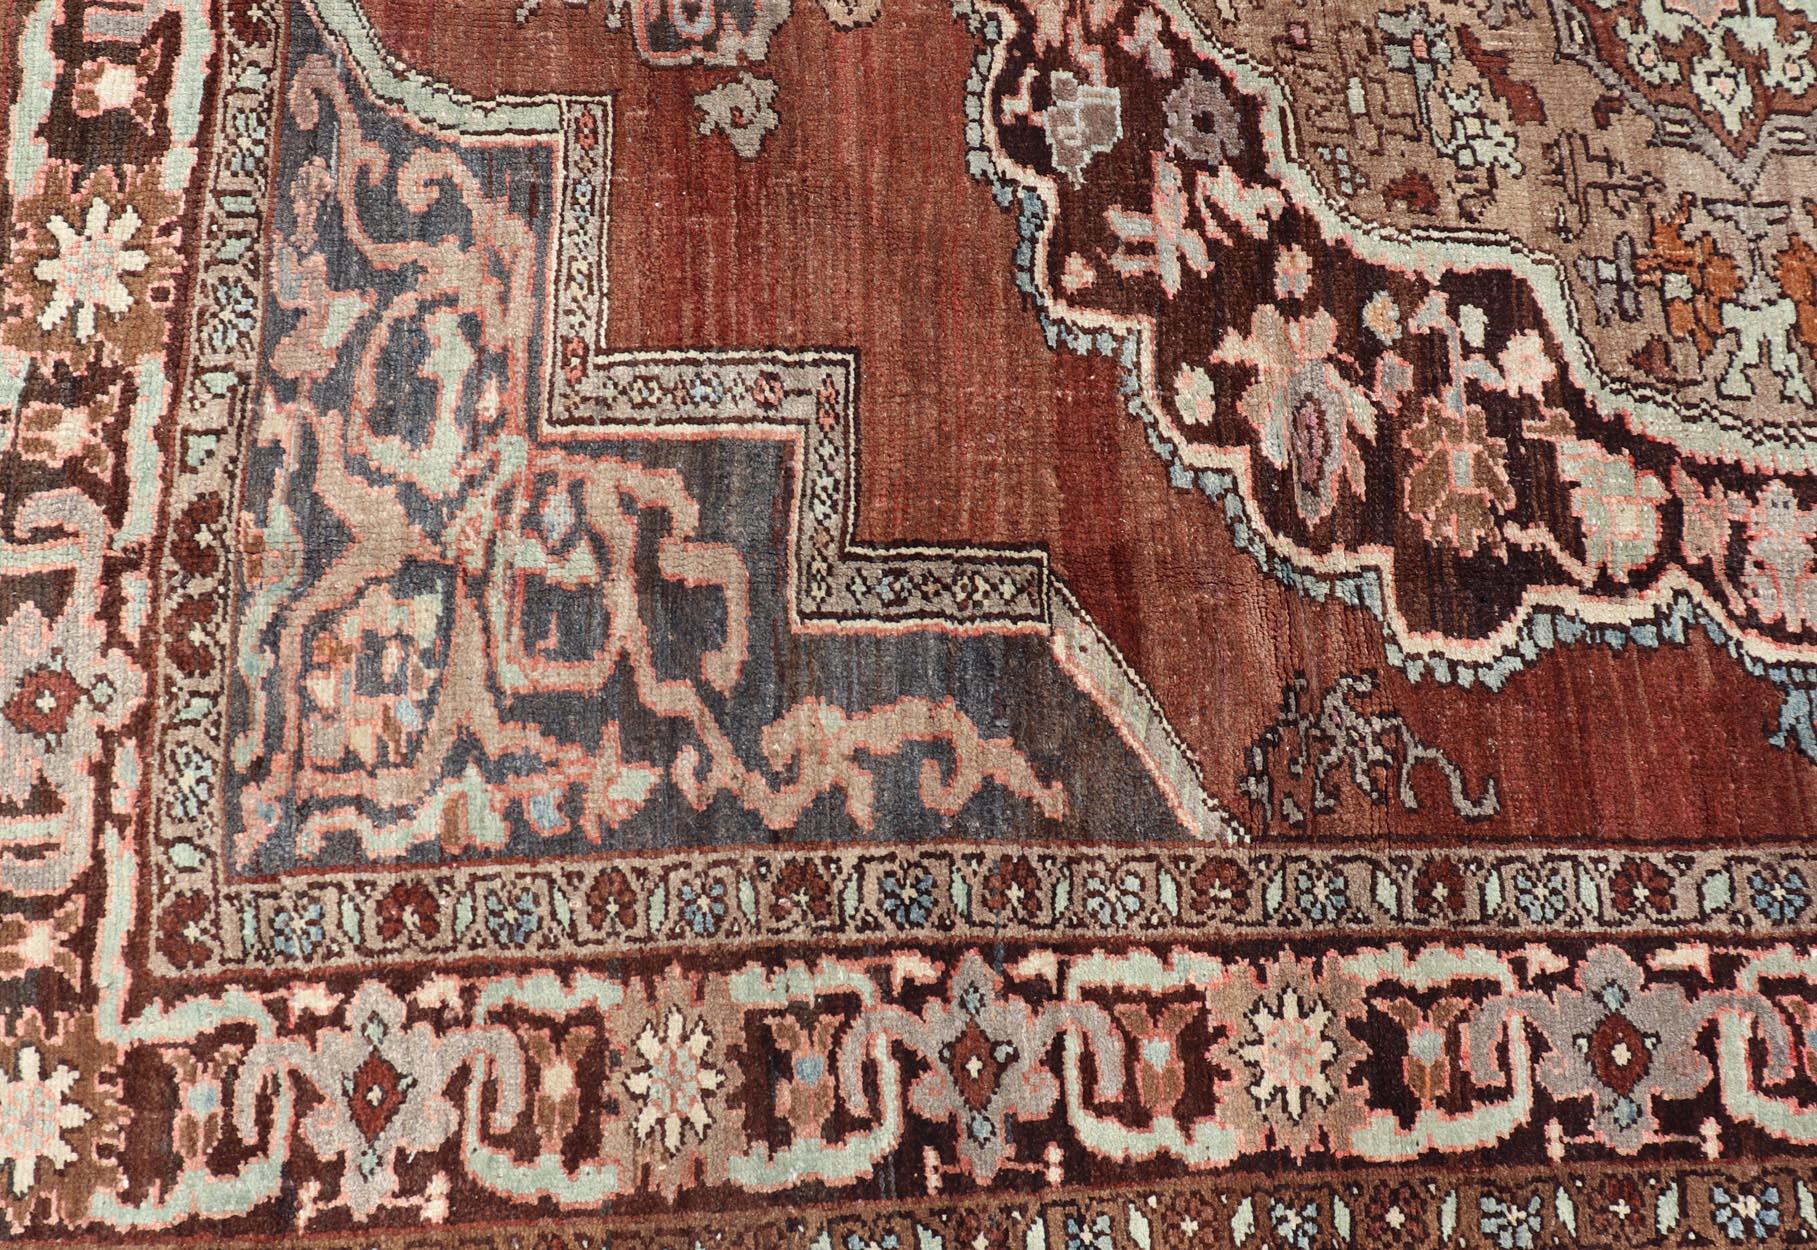 Turkish Kars Rug with Floral Medallion Design in Brown and Earthy Tones  For Sale 5